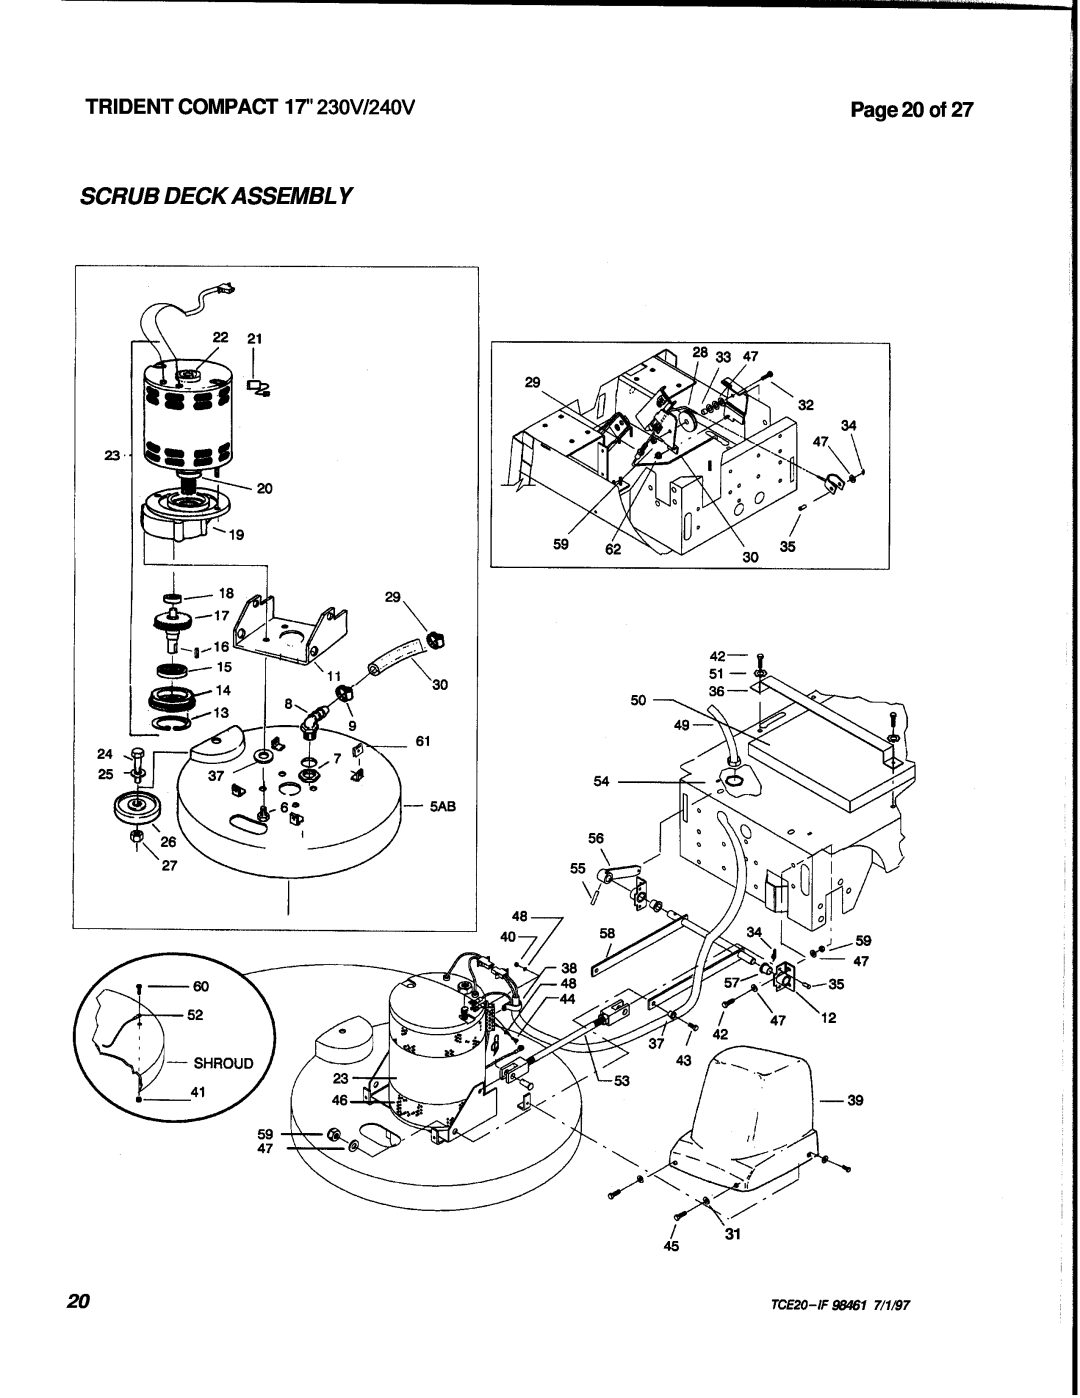 Windsor operating instructions Scrub Deck Assembly, Page 20 of, TRIDENT COMPACT 17 230V/240V, TCE20-IF 98461 7/1/97 